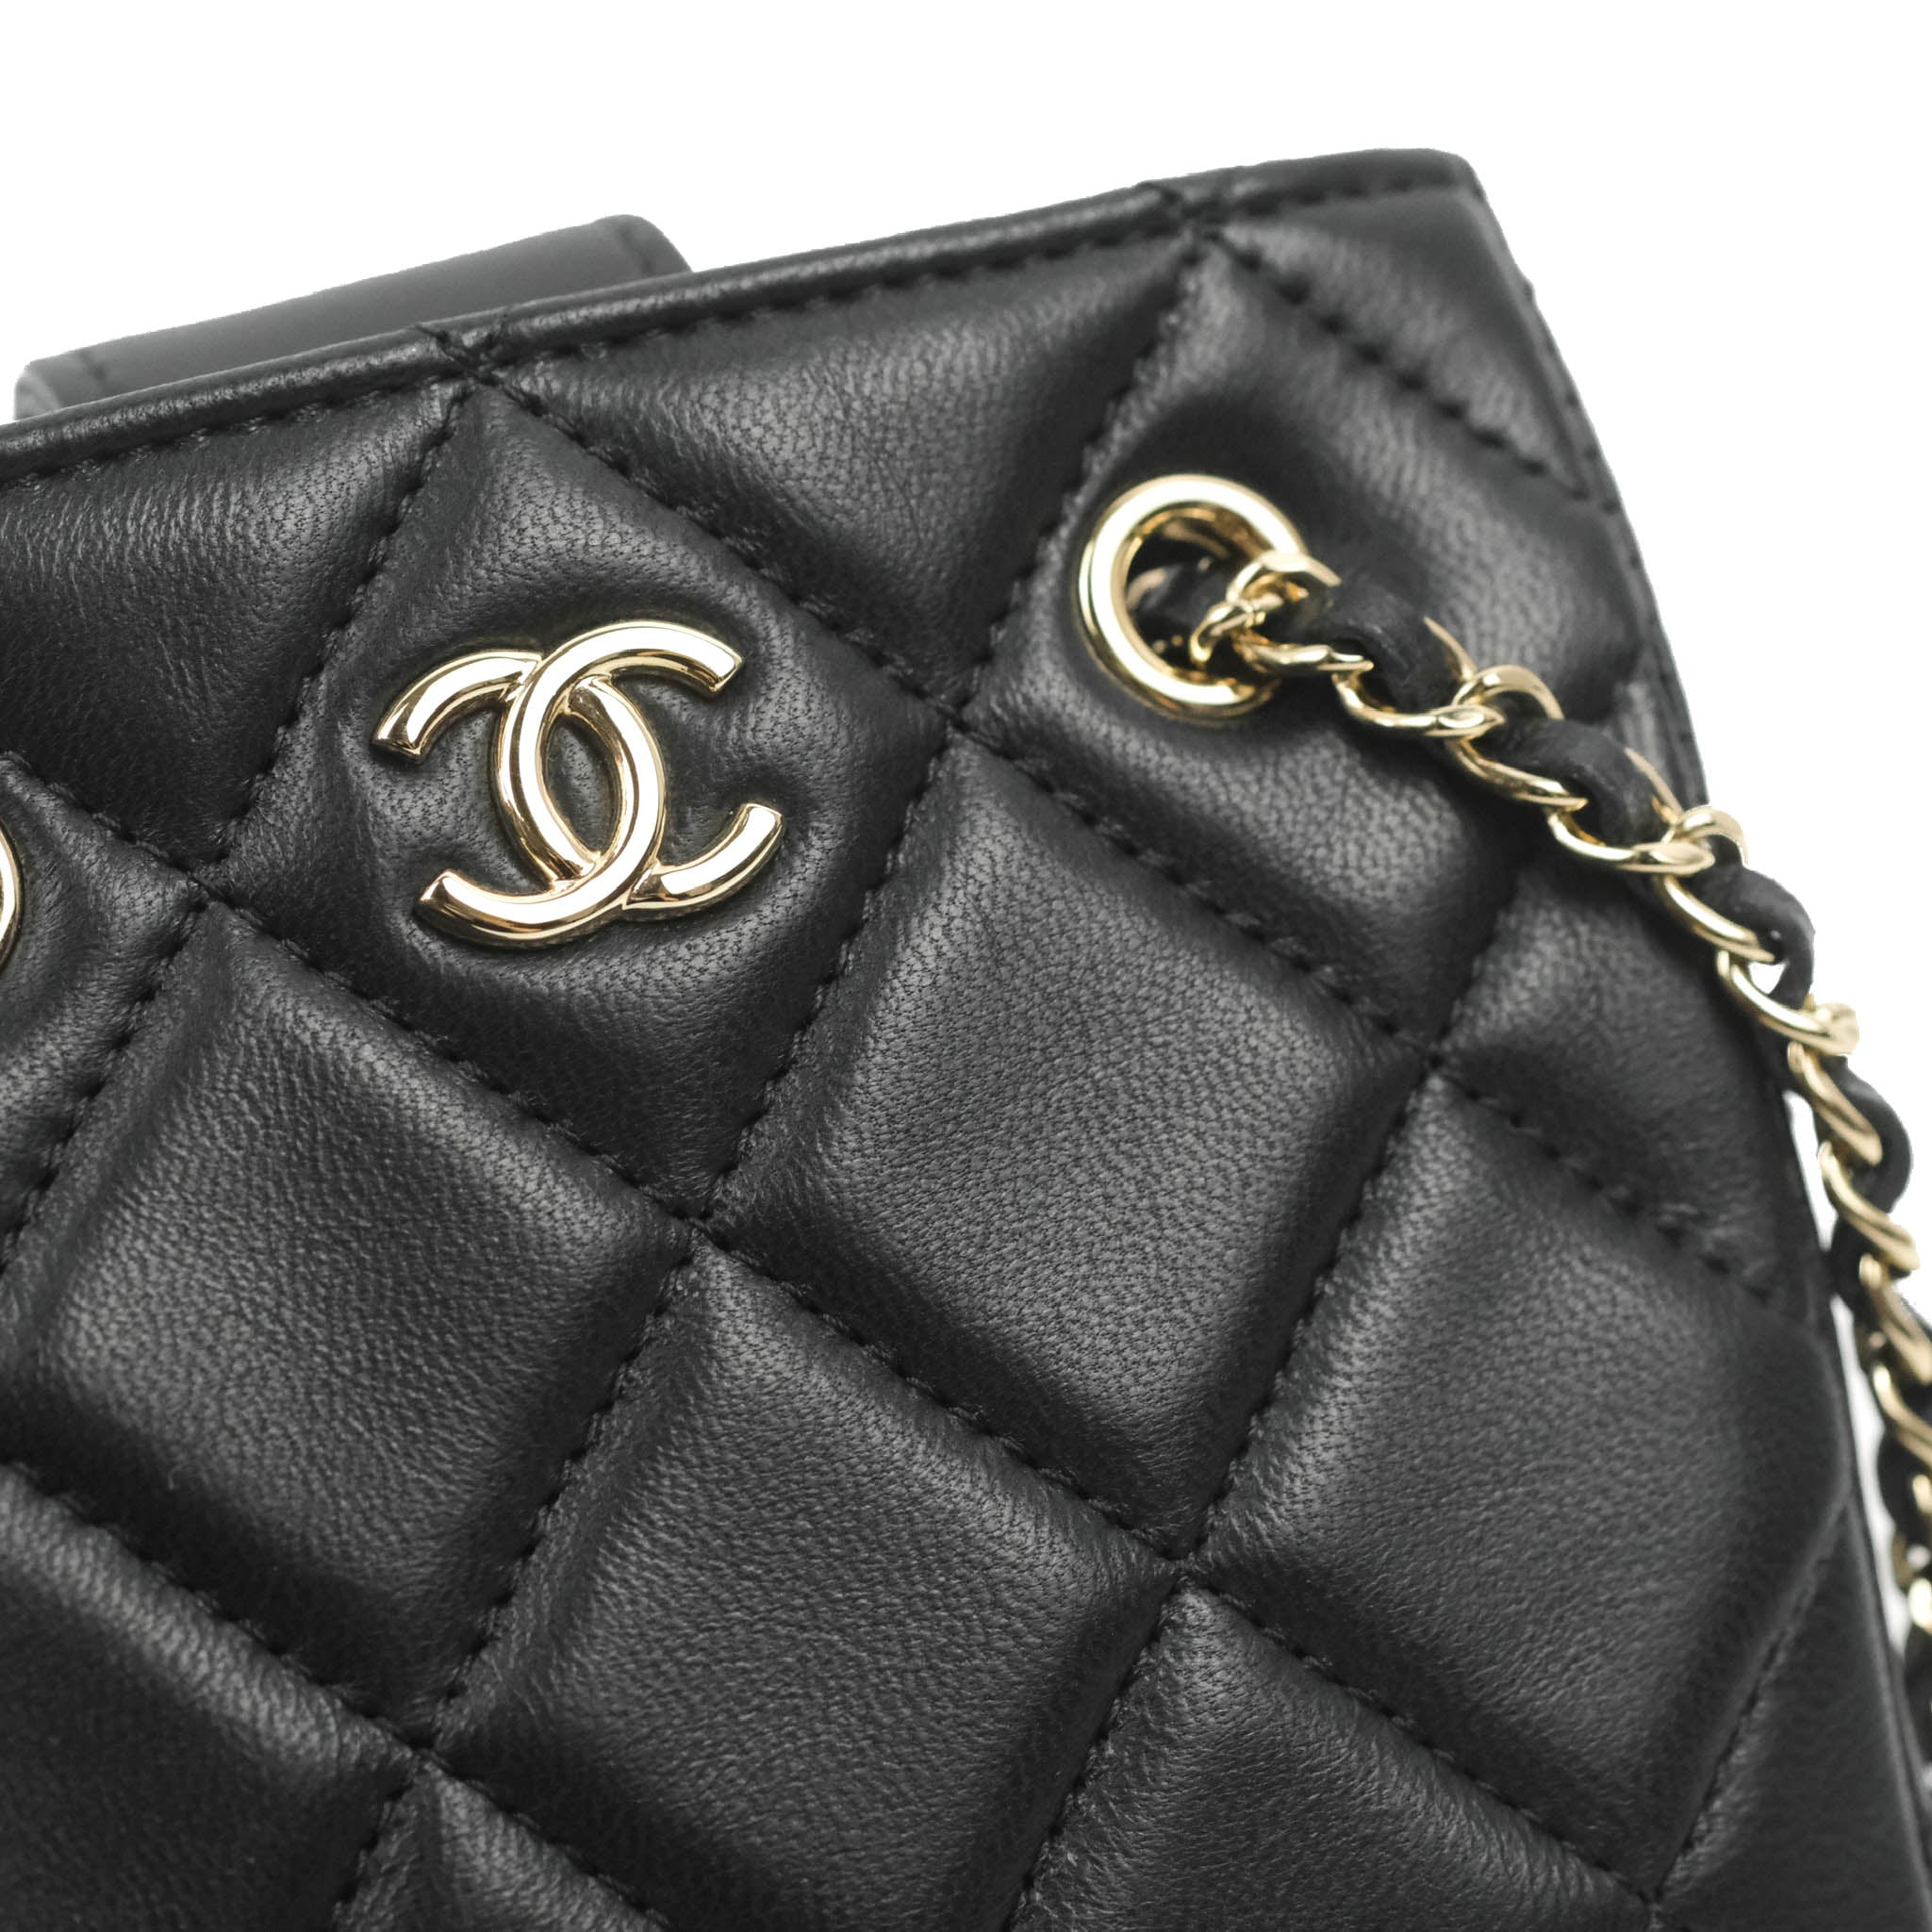 Chanel Mini Quilted Trendy CC Clutch With Chain Tiffany Blue